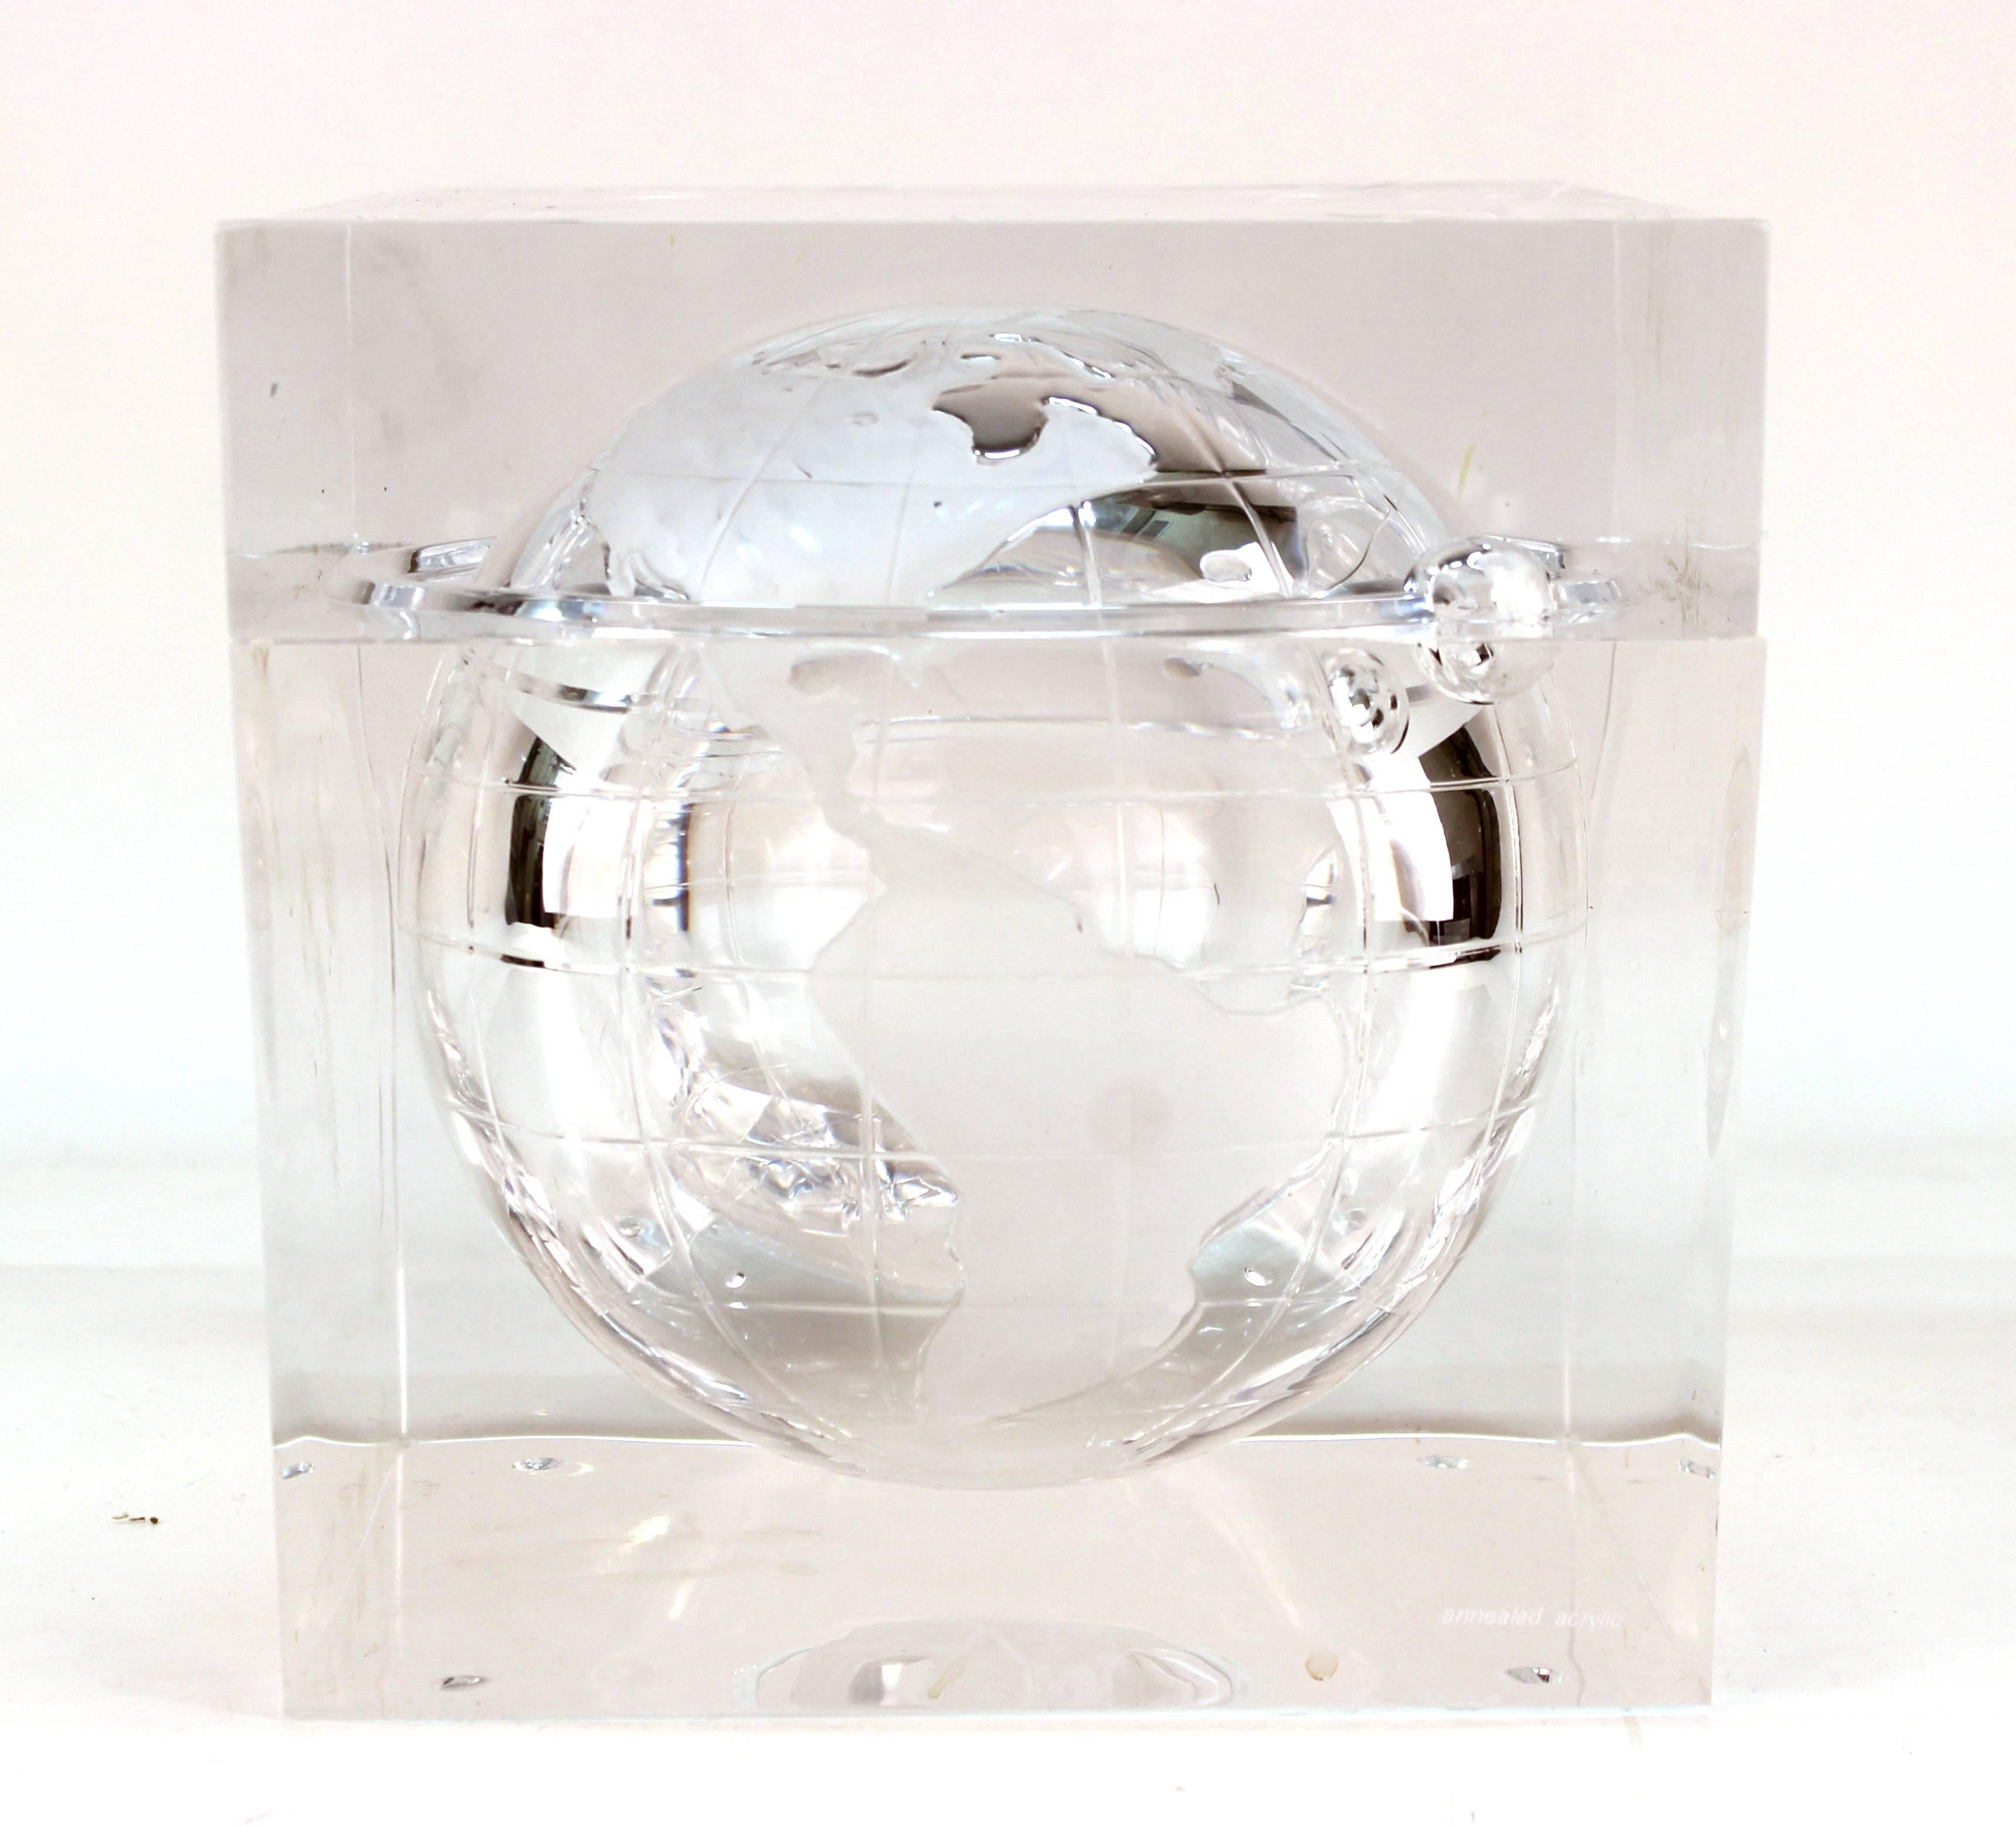 Alessandro Albrizzi ice bucket with globe. Designed as a clear acrylic or Lucite cube with incised globe. Features also include a removable top. Marked [annealed acrylic] on one corner. Scrapes and nicks throughout with wear appropriate to use. The